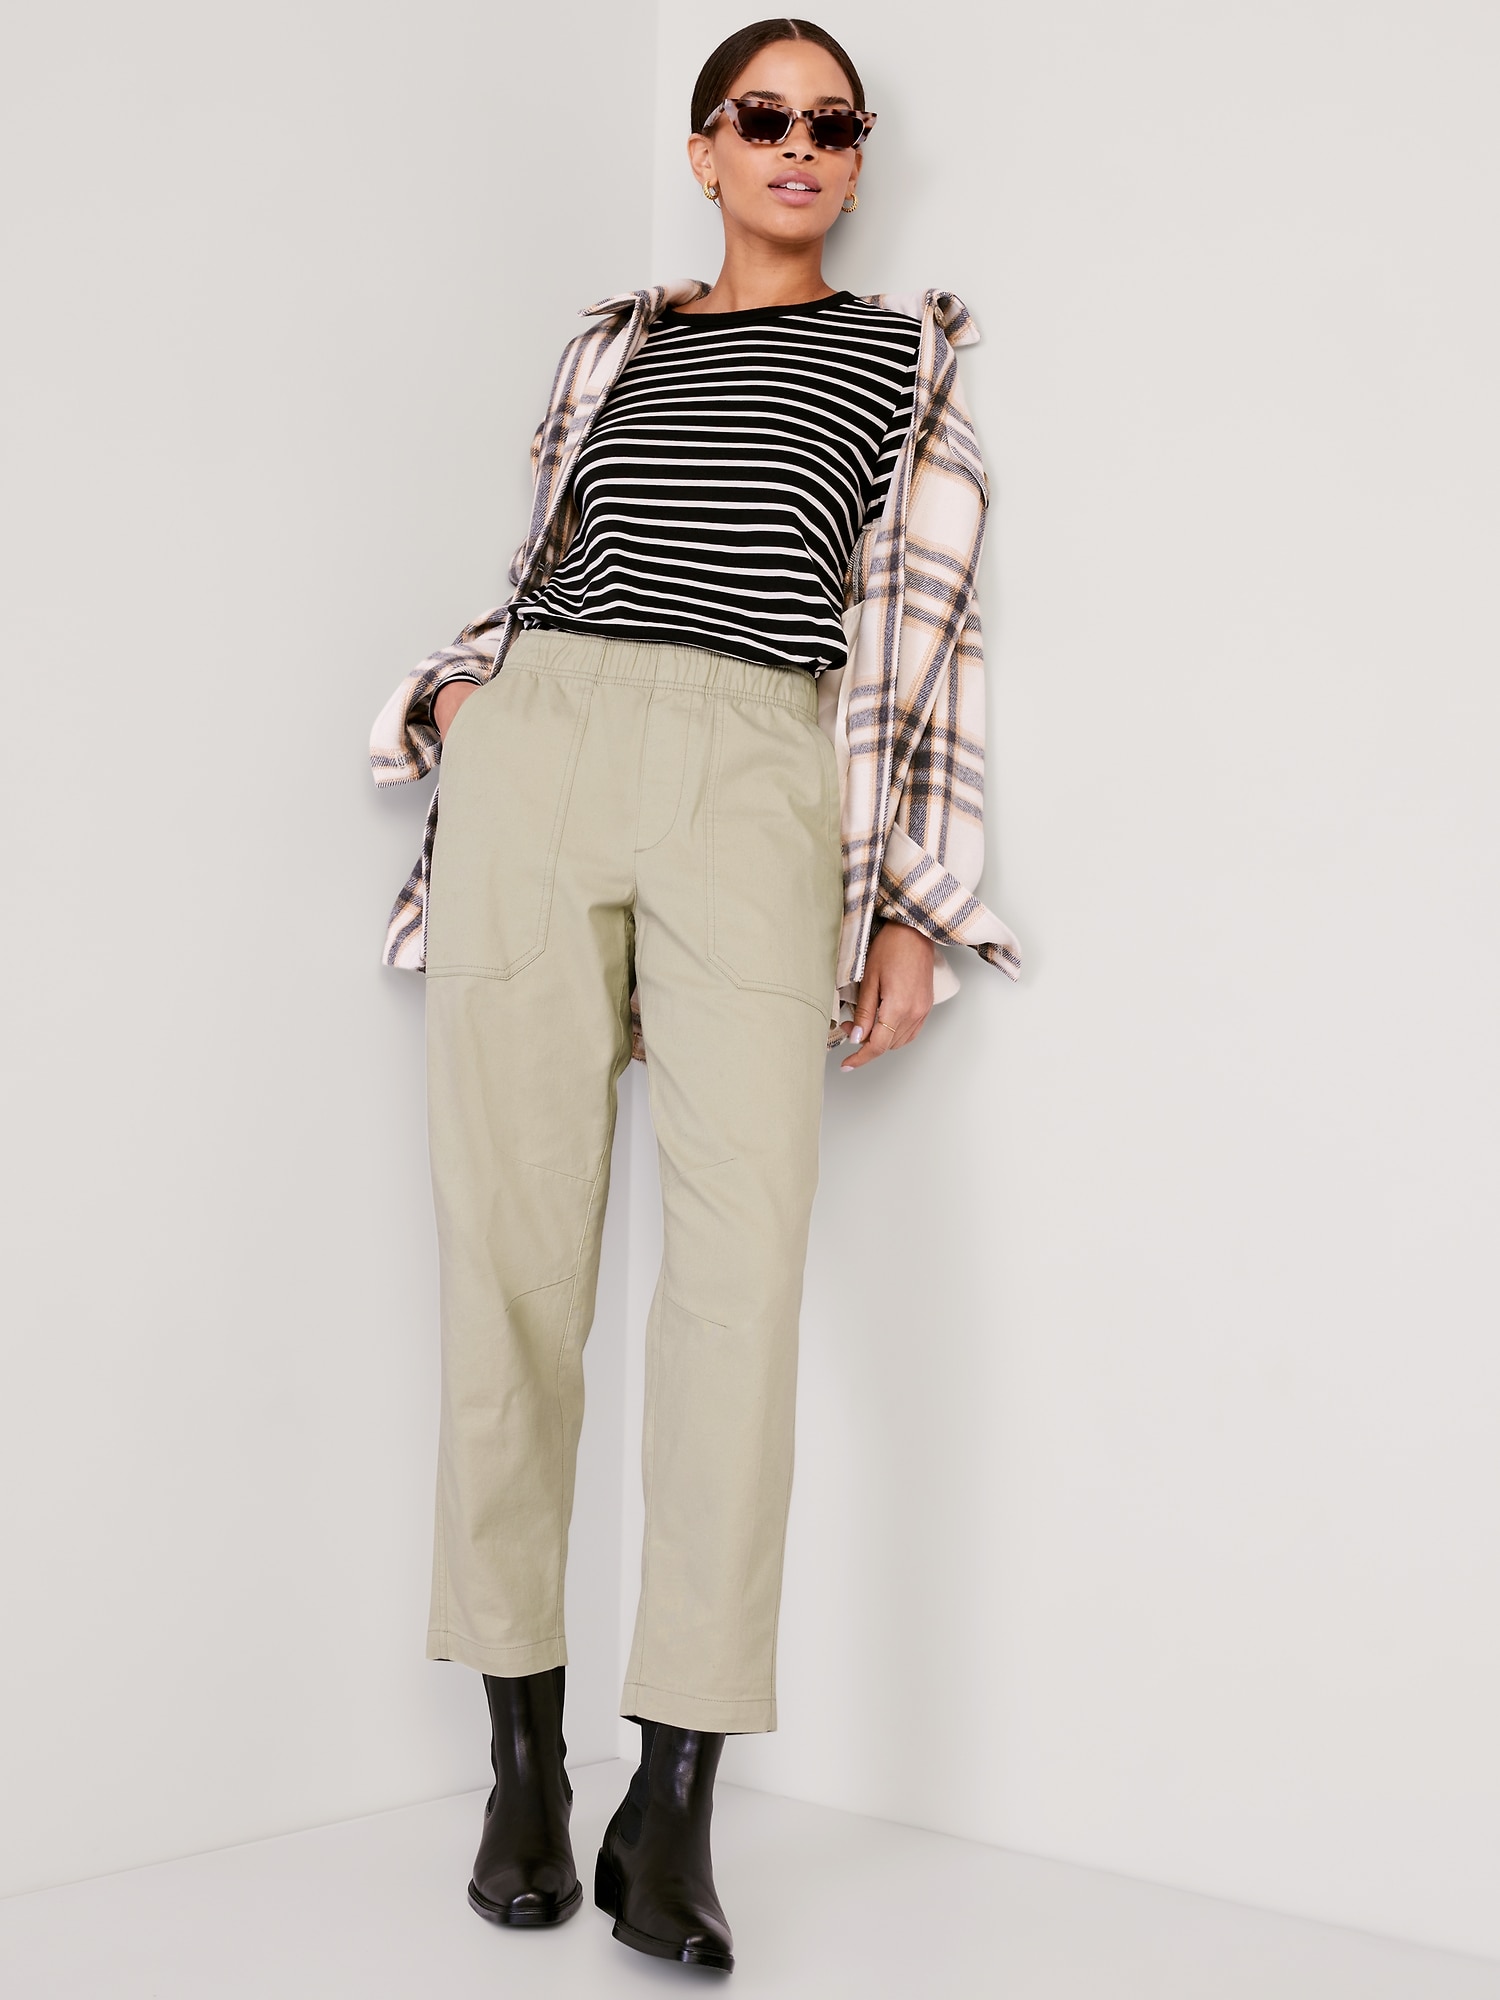 High-Waisted Pulla Utility Pants | Old Navy